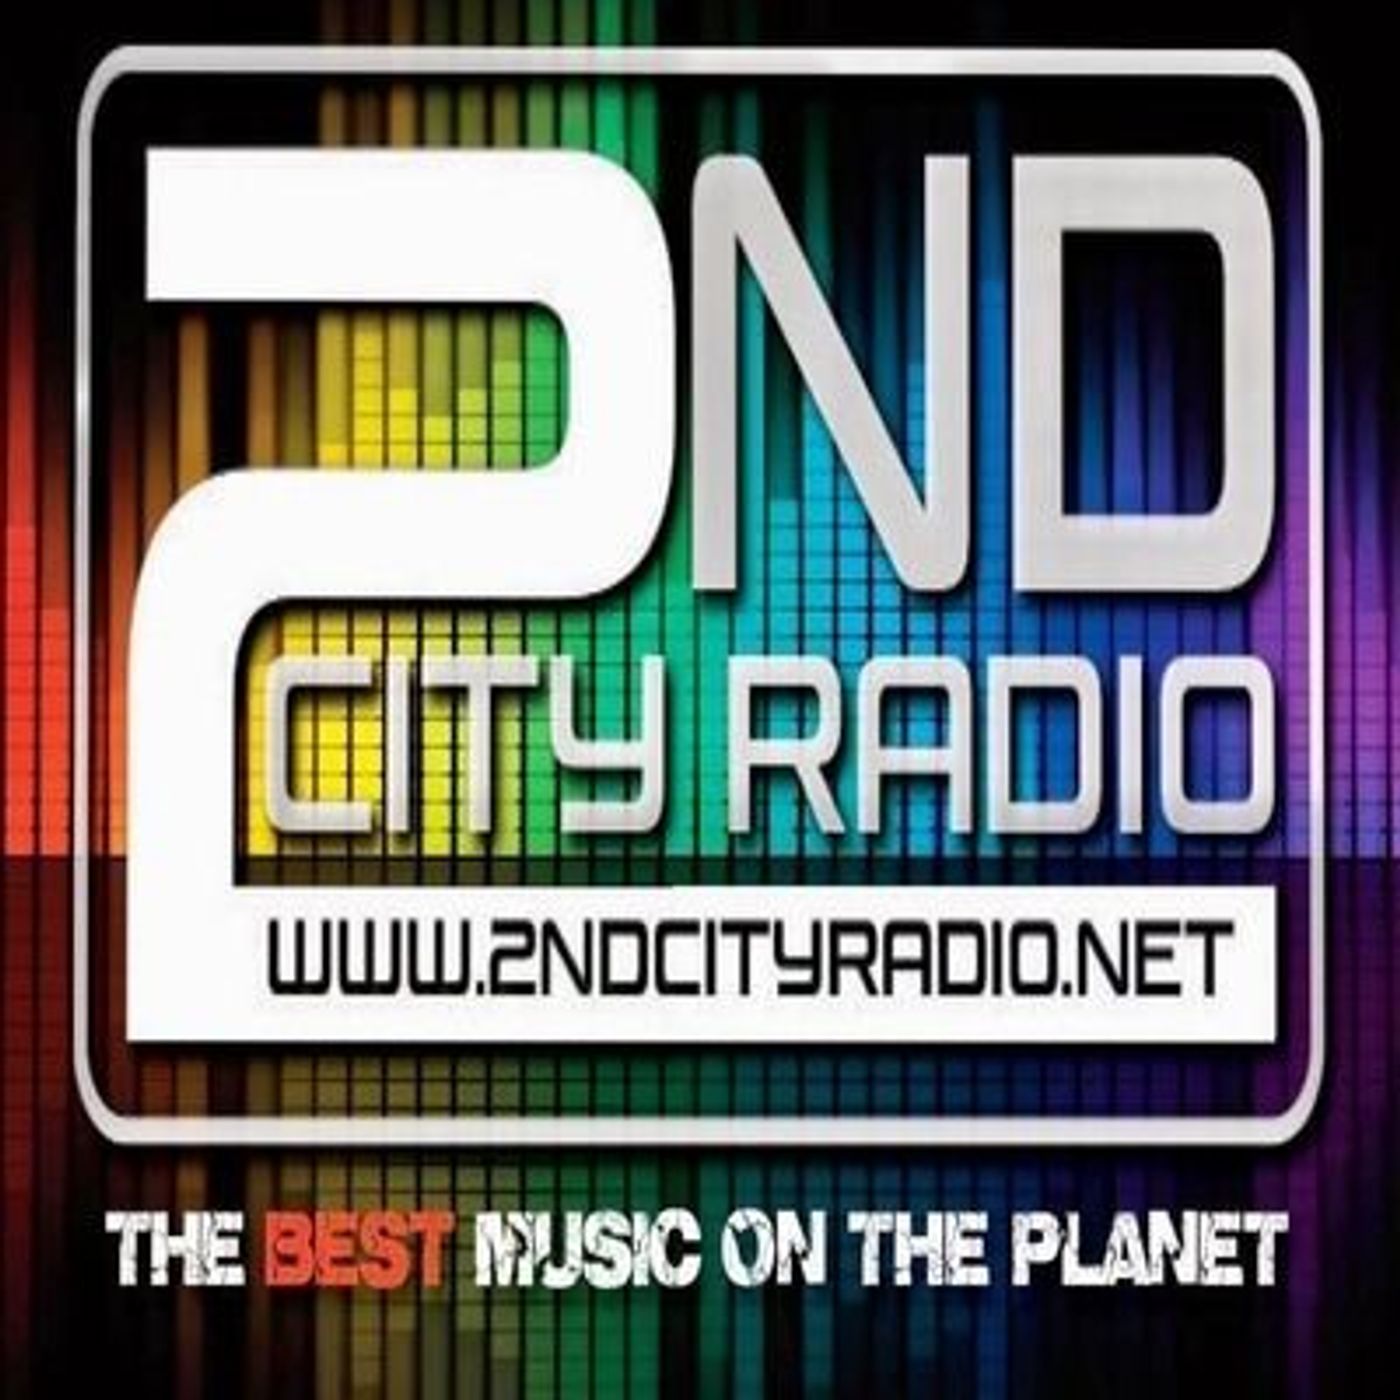 Thursday the 19th of May 2022 on 2ndcity Radio with Classic Chat